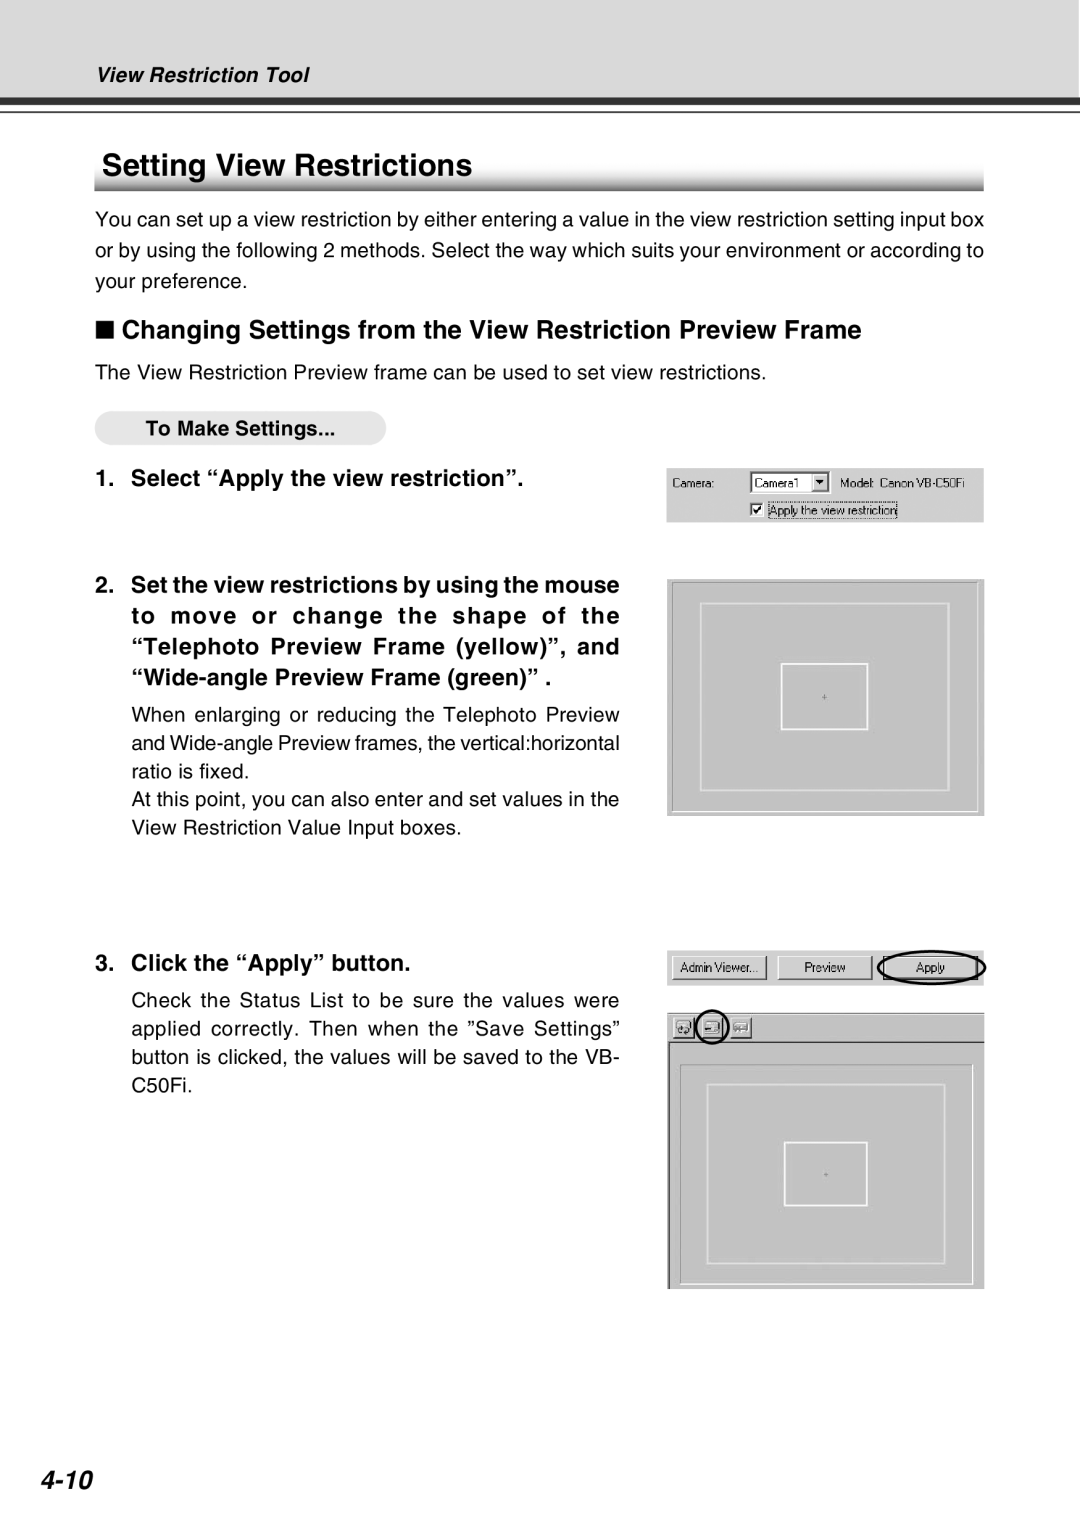 Canon Vb-C50fi user manual Setting View Restrictions, 4-10, Select “Apply the view restriction”, Click the “Apply” button 